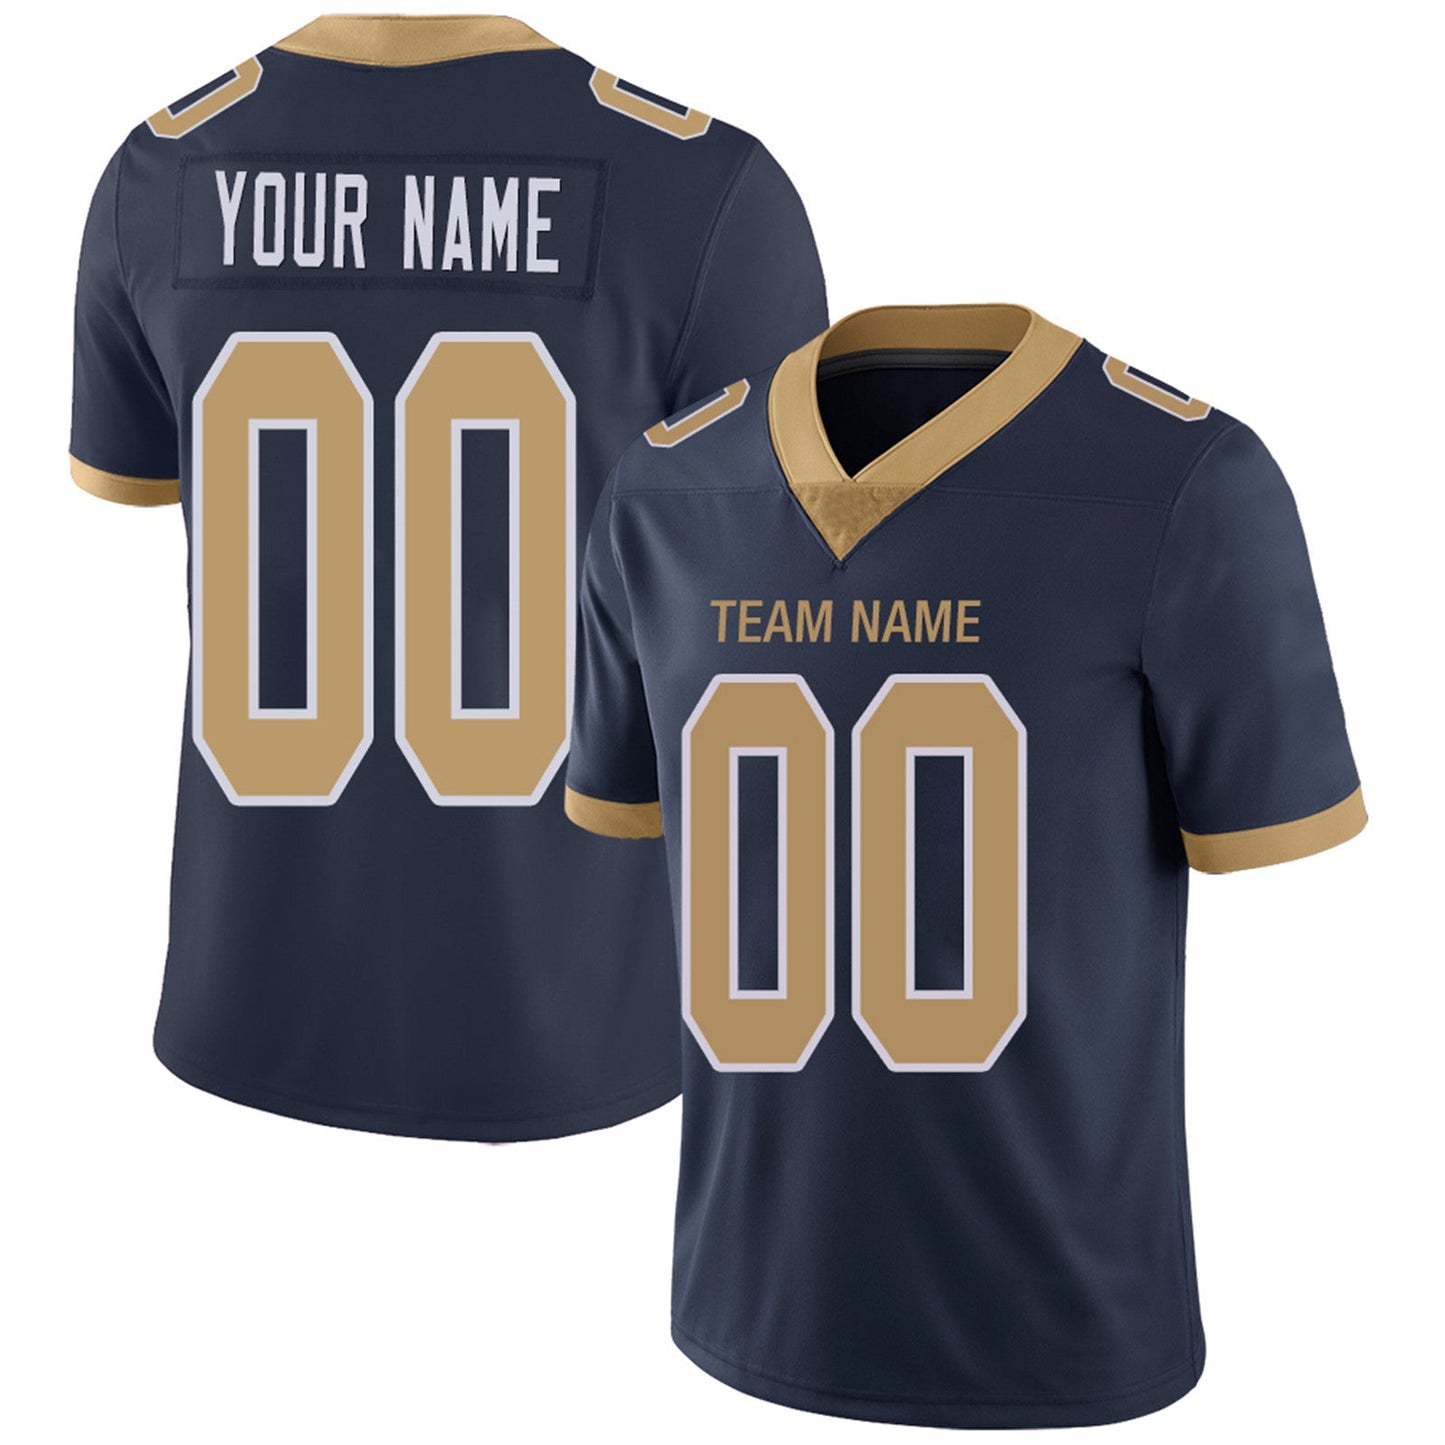 Custom LA.Chargers Football Jerseys Team Player or Personalized Design Your Own Name for Men's Women's Youth Jerseys Navy